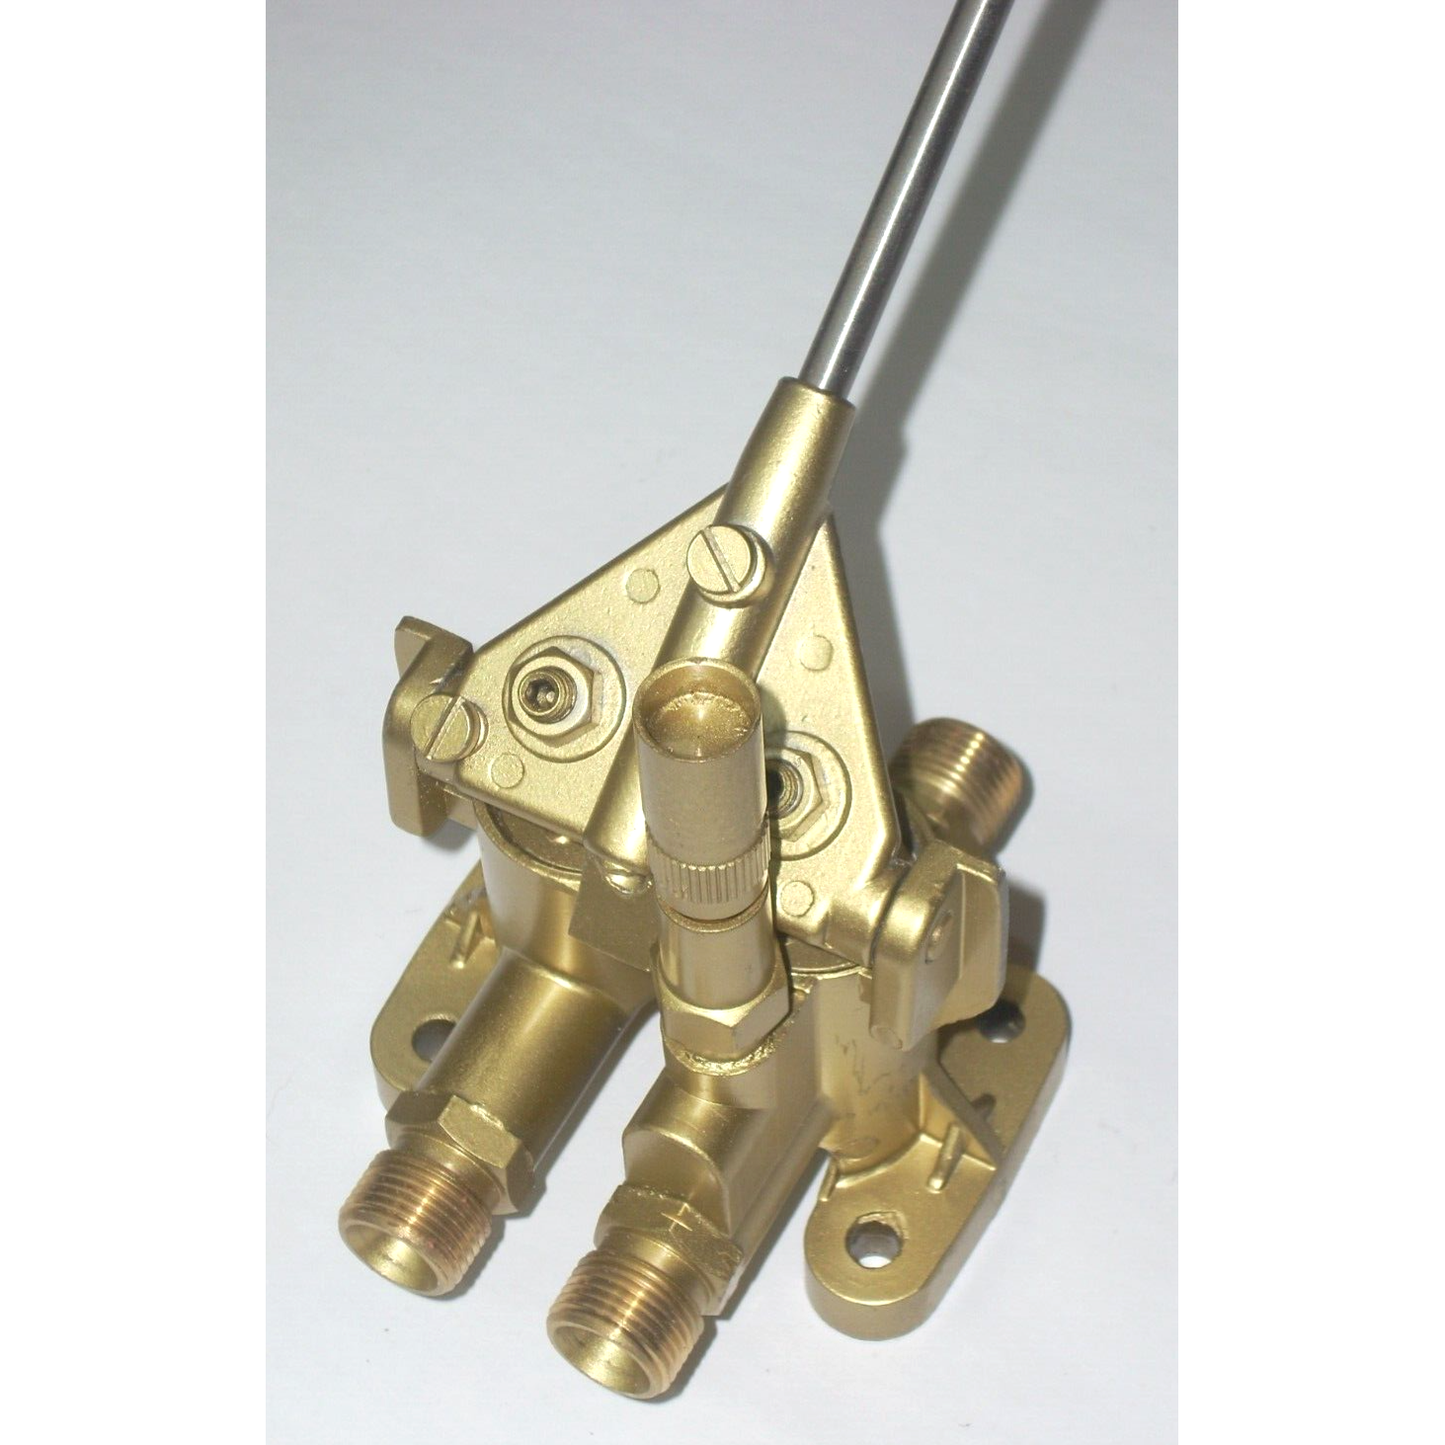 Oxy-Acetylene Gas Saver for Cutting Welding Torch